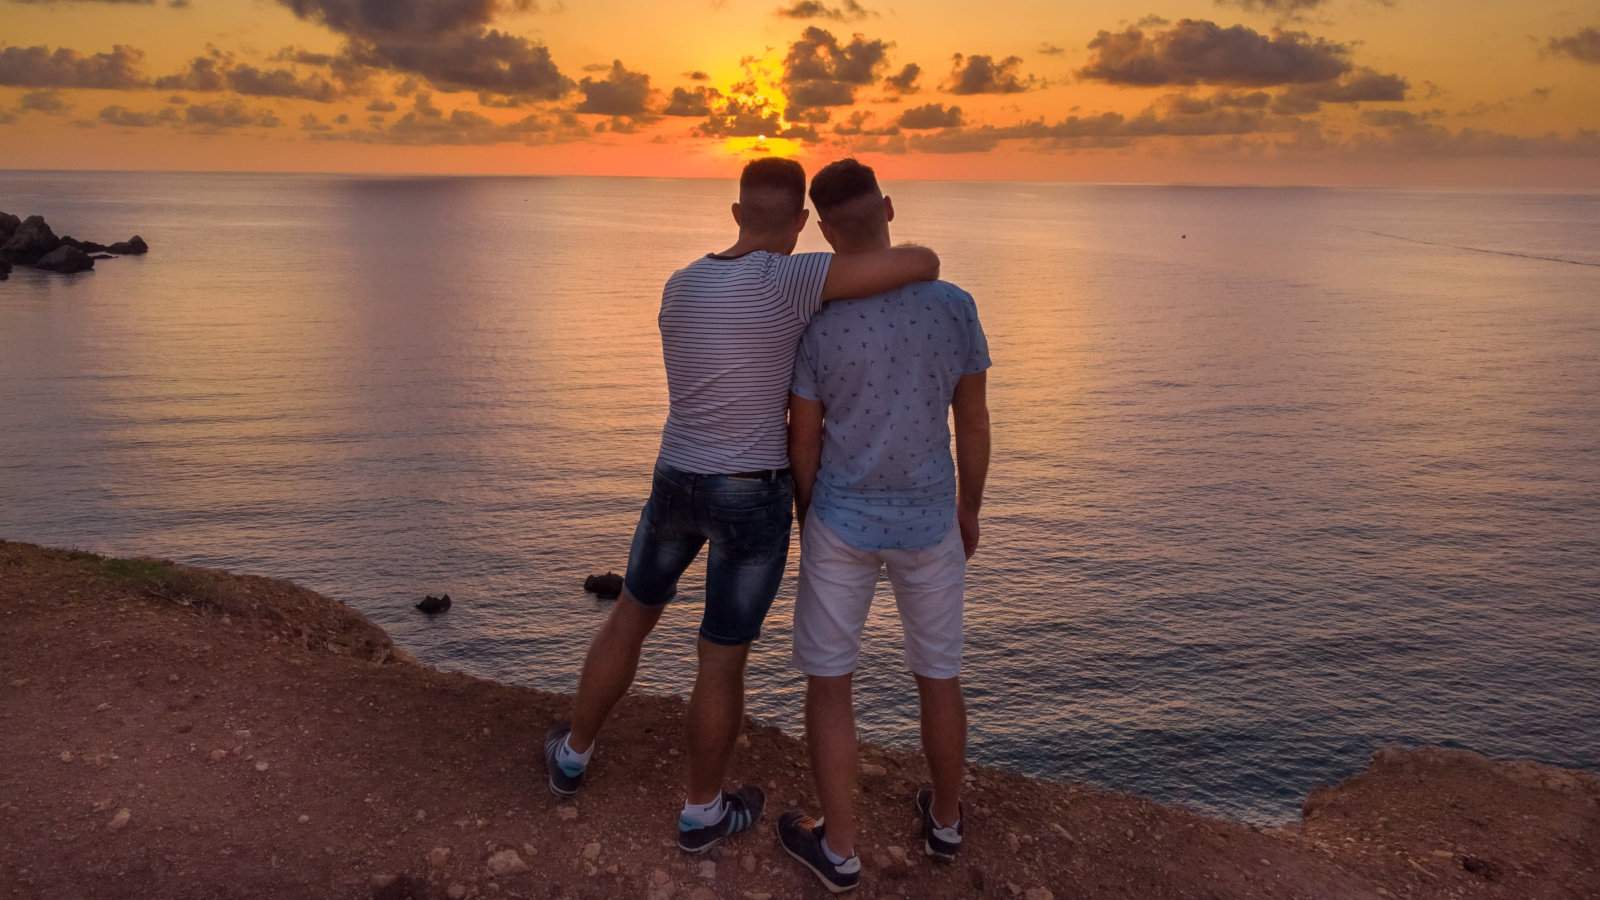 Follow our handy tips and tricks to experience the best gay Malta has to offer